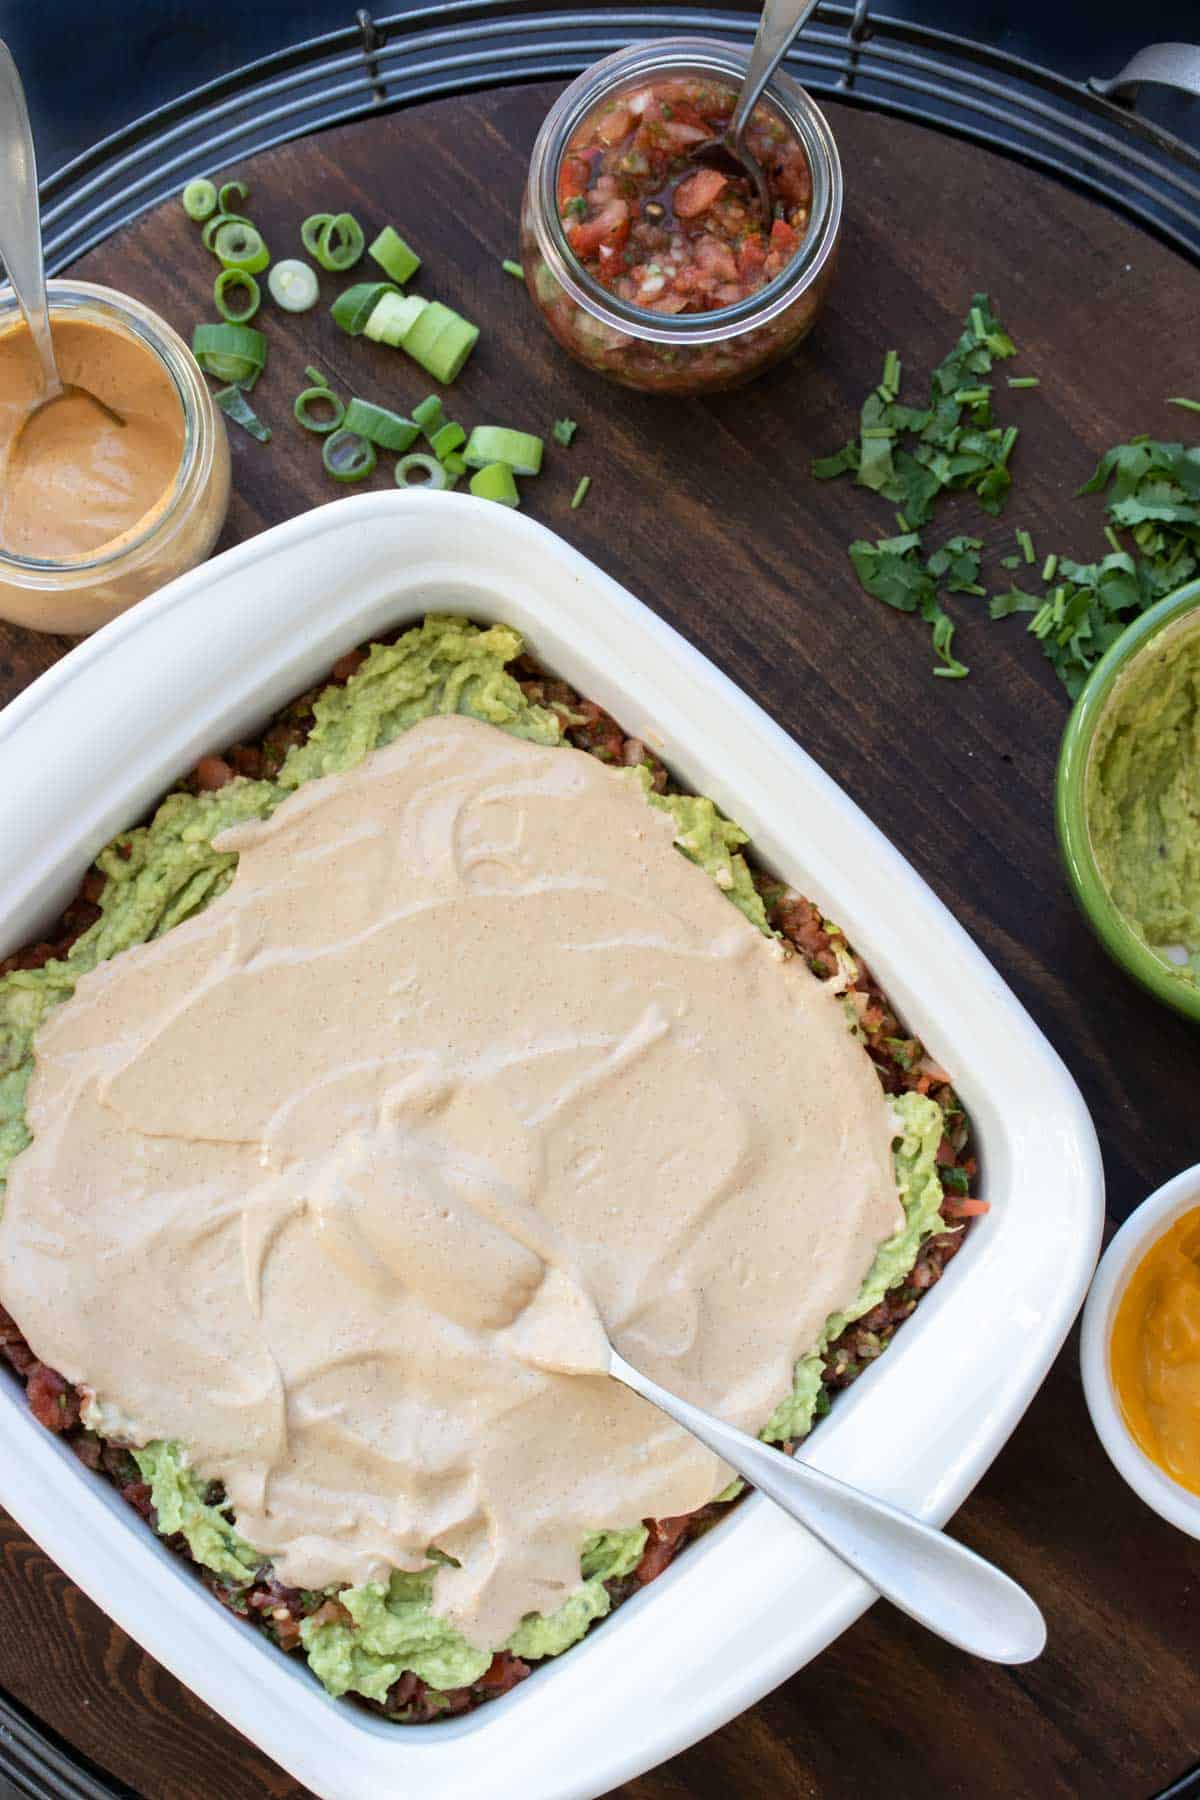 A light pink creamy sauce being spread over a layer of guacamole that is the top of a 7 layer dip in a baking dish.